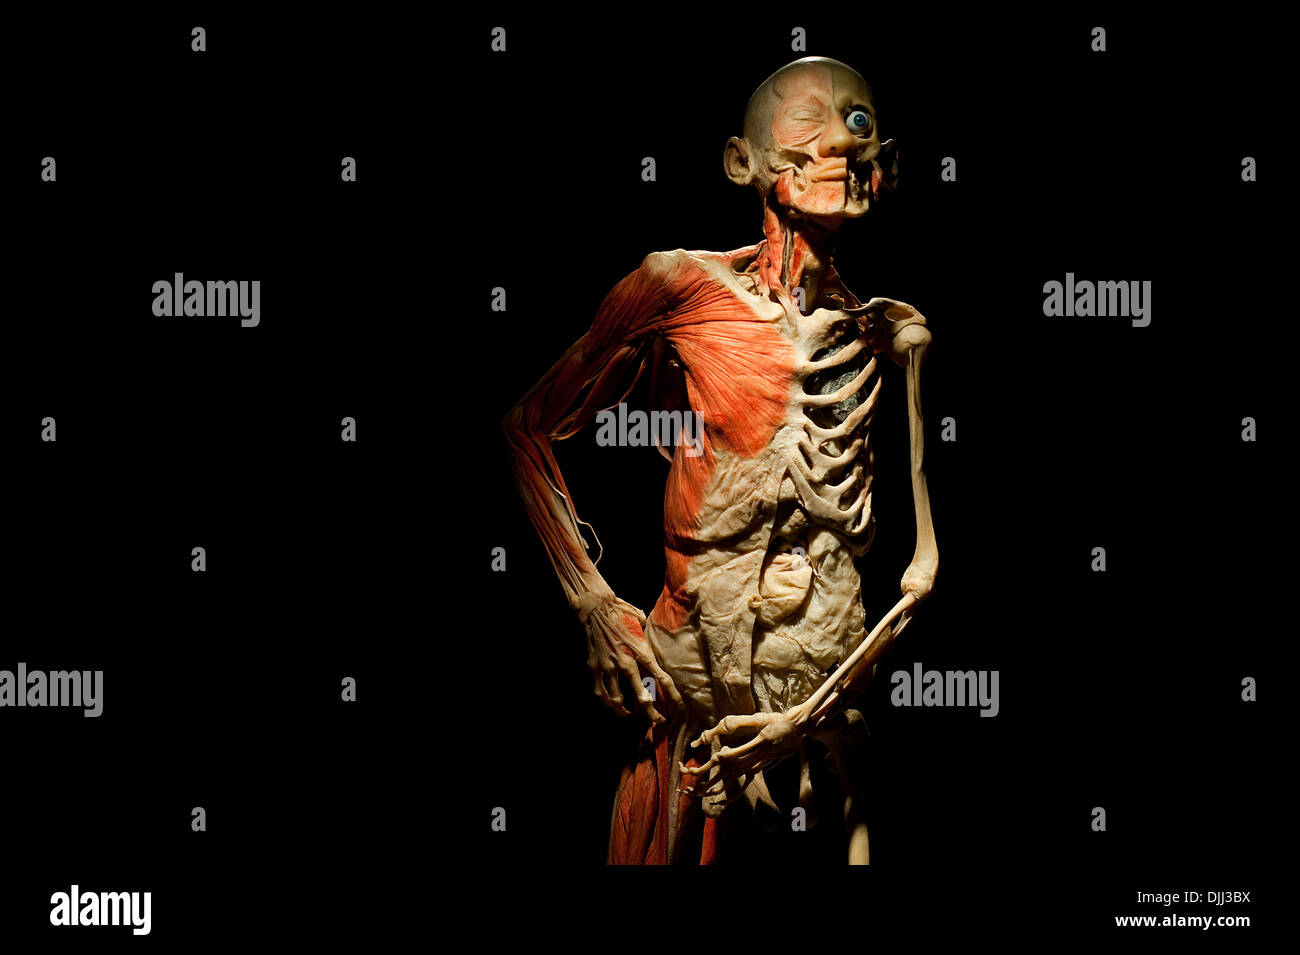 Preserved human body dissected to display the internal organs. It is showcased in the 'Bodies revealed' exhibition ( Bulgaria) Stock Photo